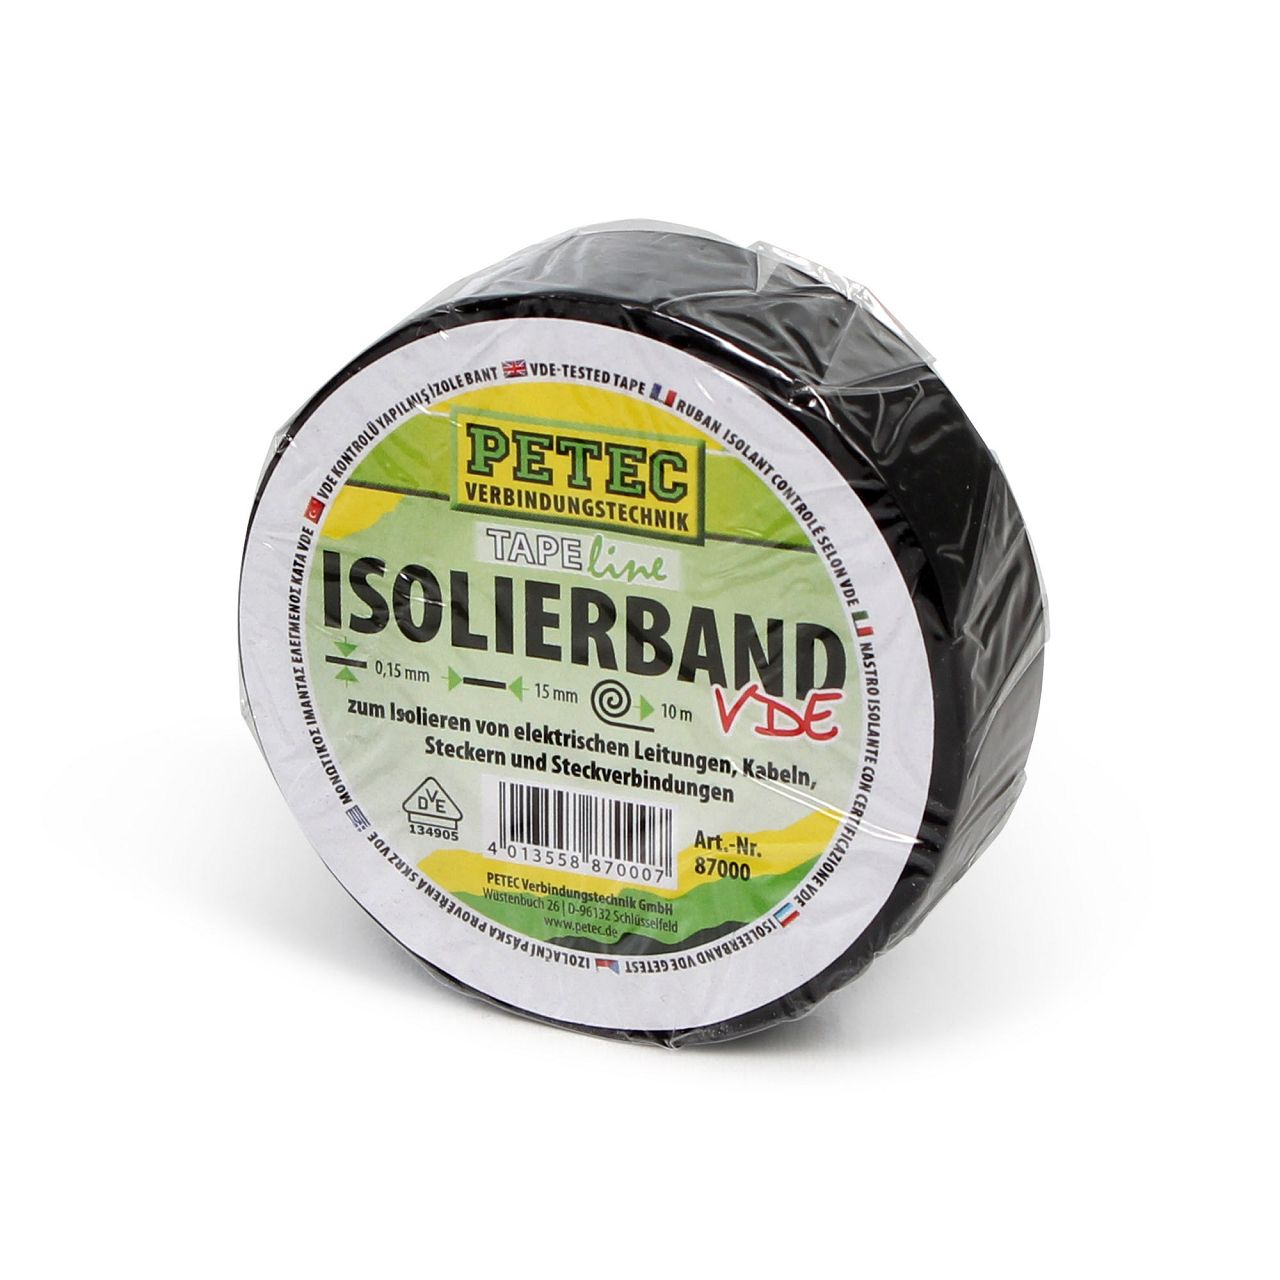 PETEC 87000 Isolierband VDE Klebeband Isolier-Tape ISO-Band 15mm x  10m SCHWARZ 